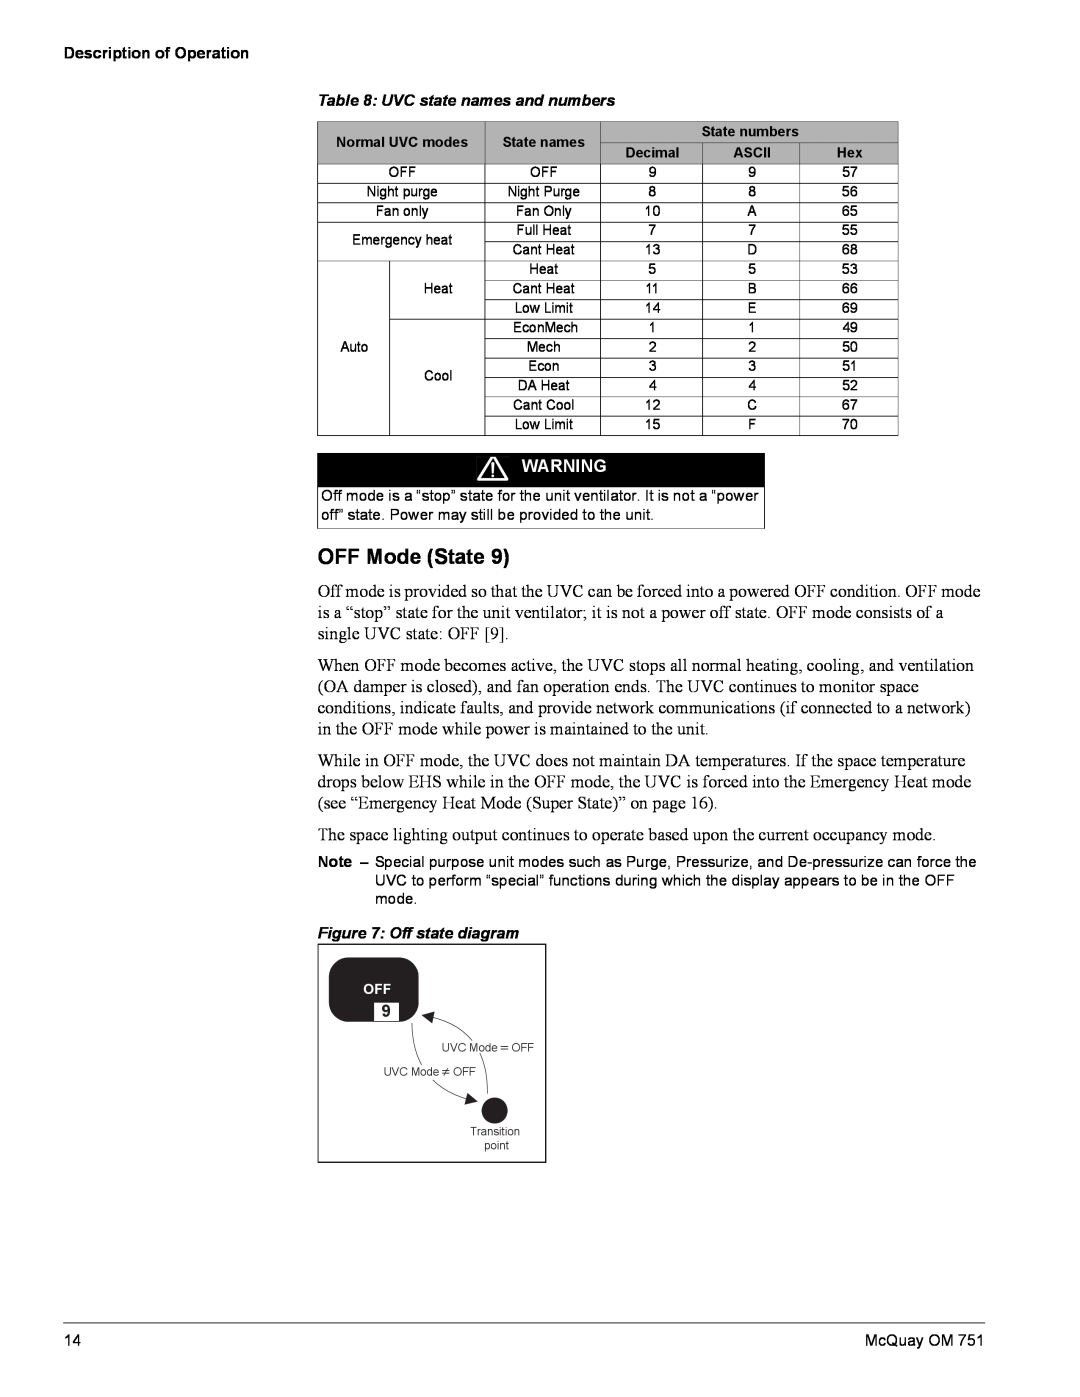 American Standard UV05 manual OFF Mode State, UVC state names and numbers, Off state diagram 